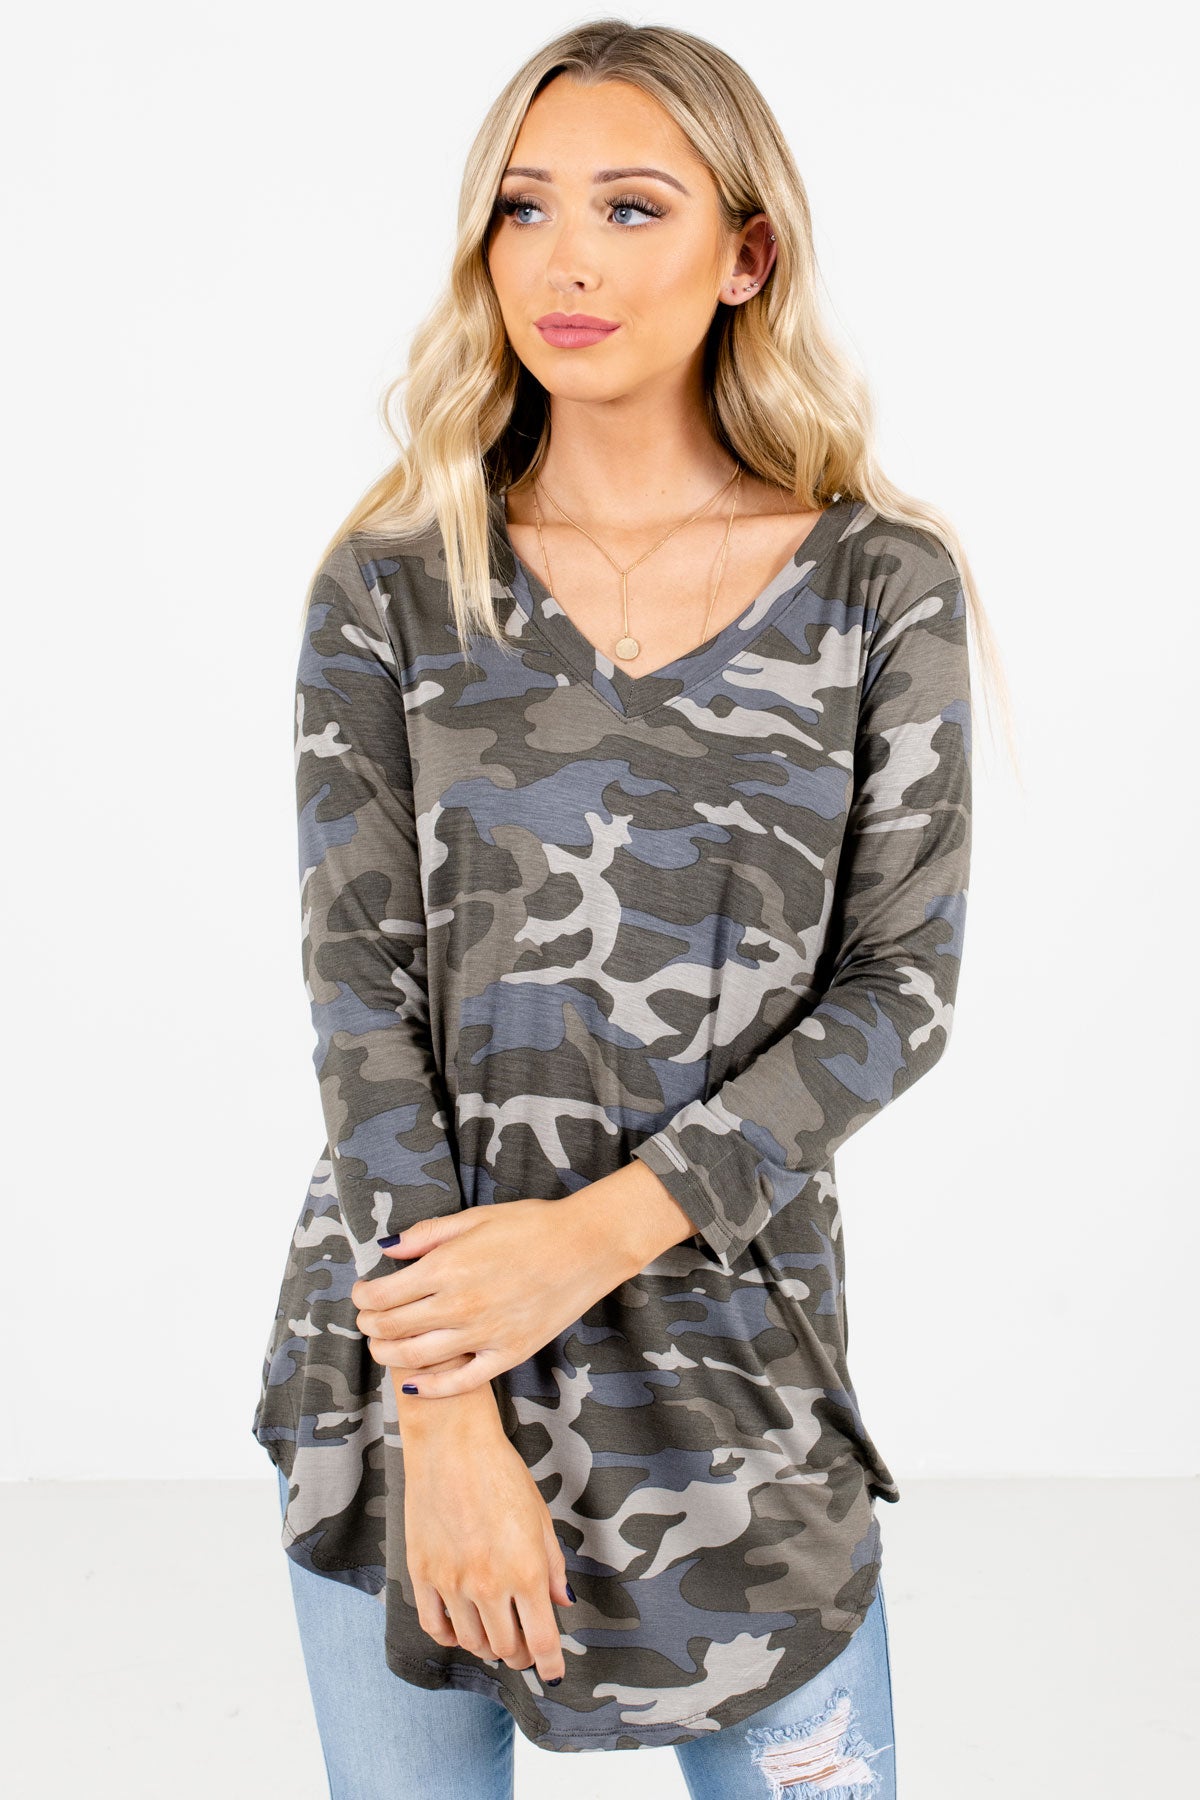 Green Camouflage Print Boutique Tops for Women